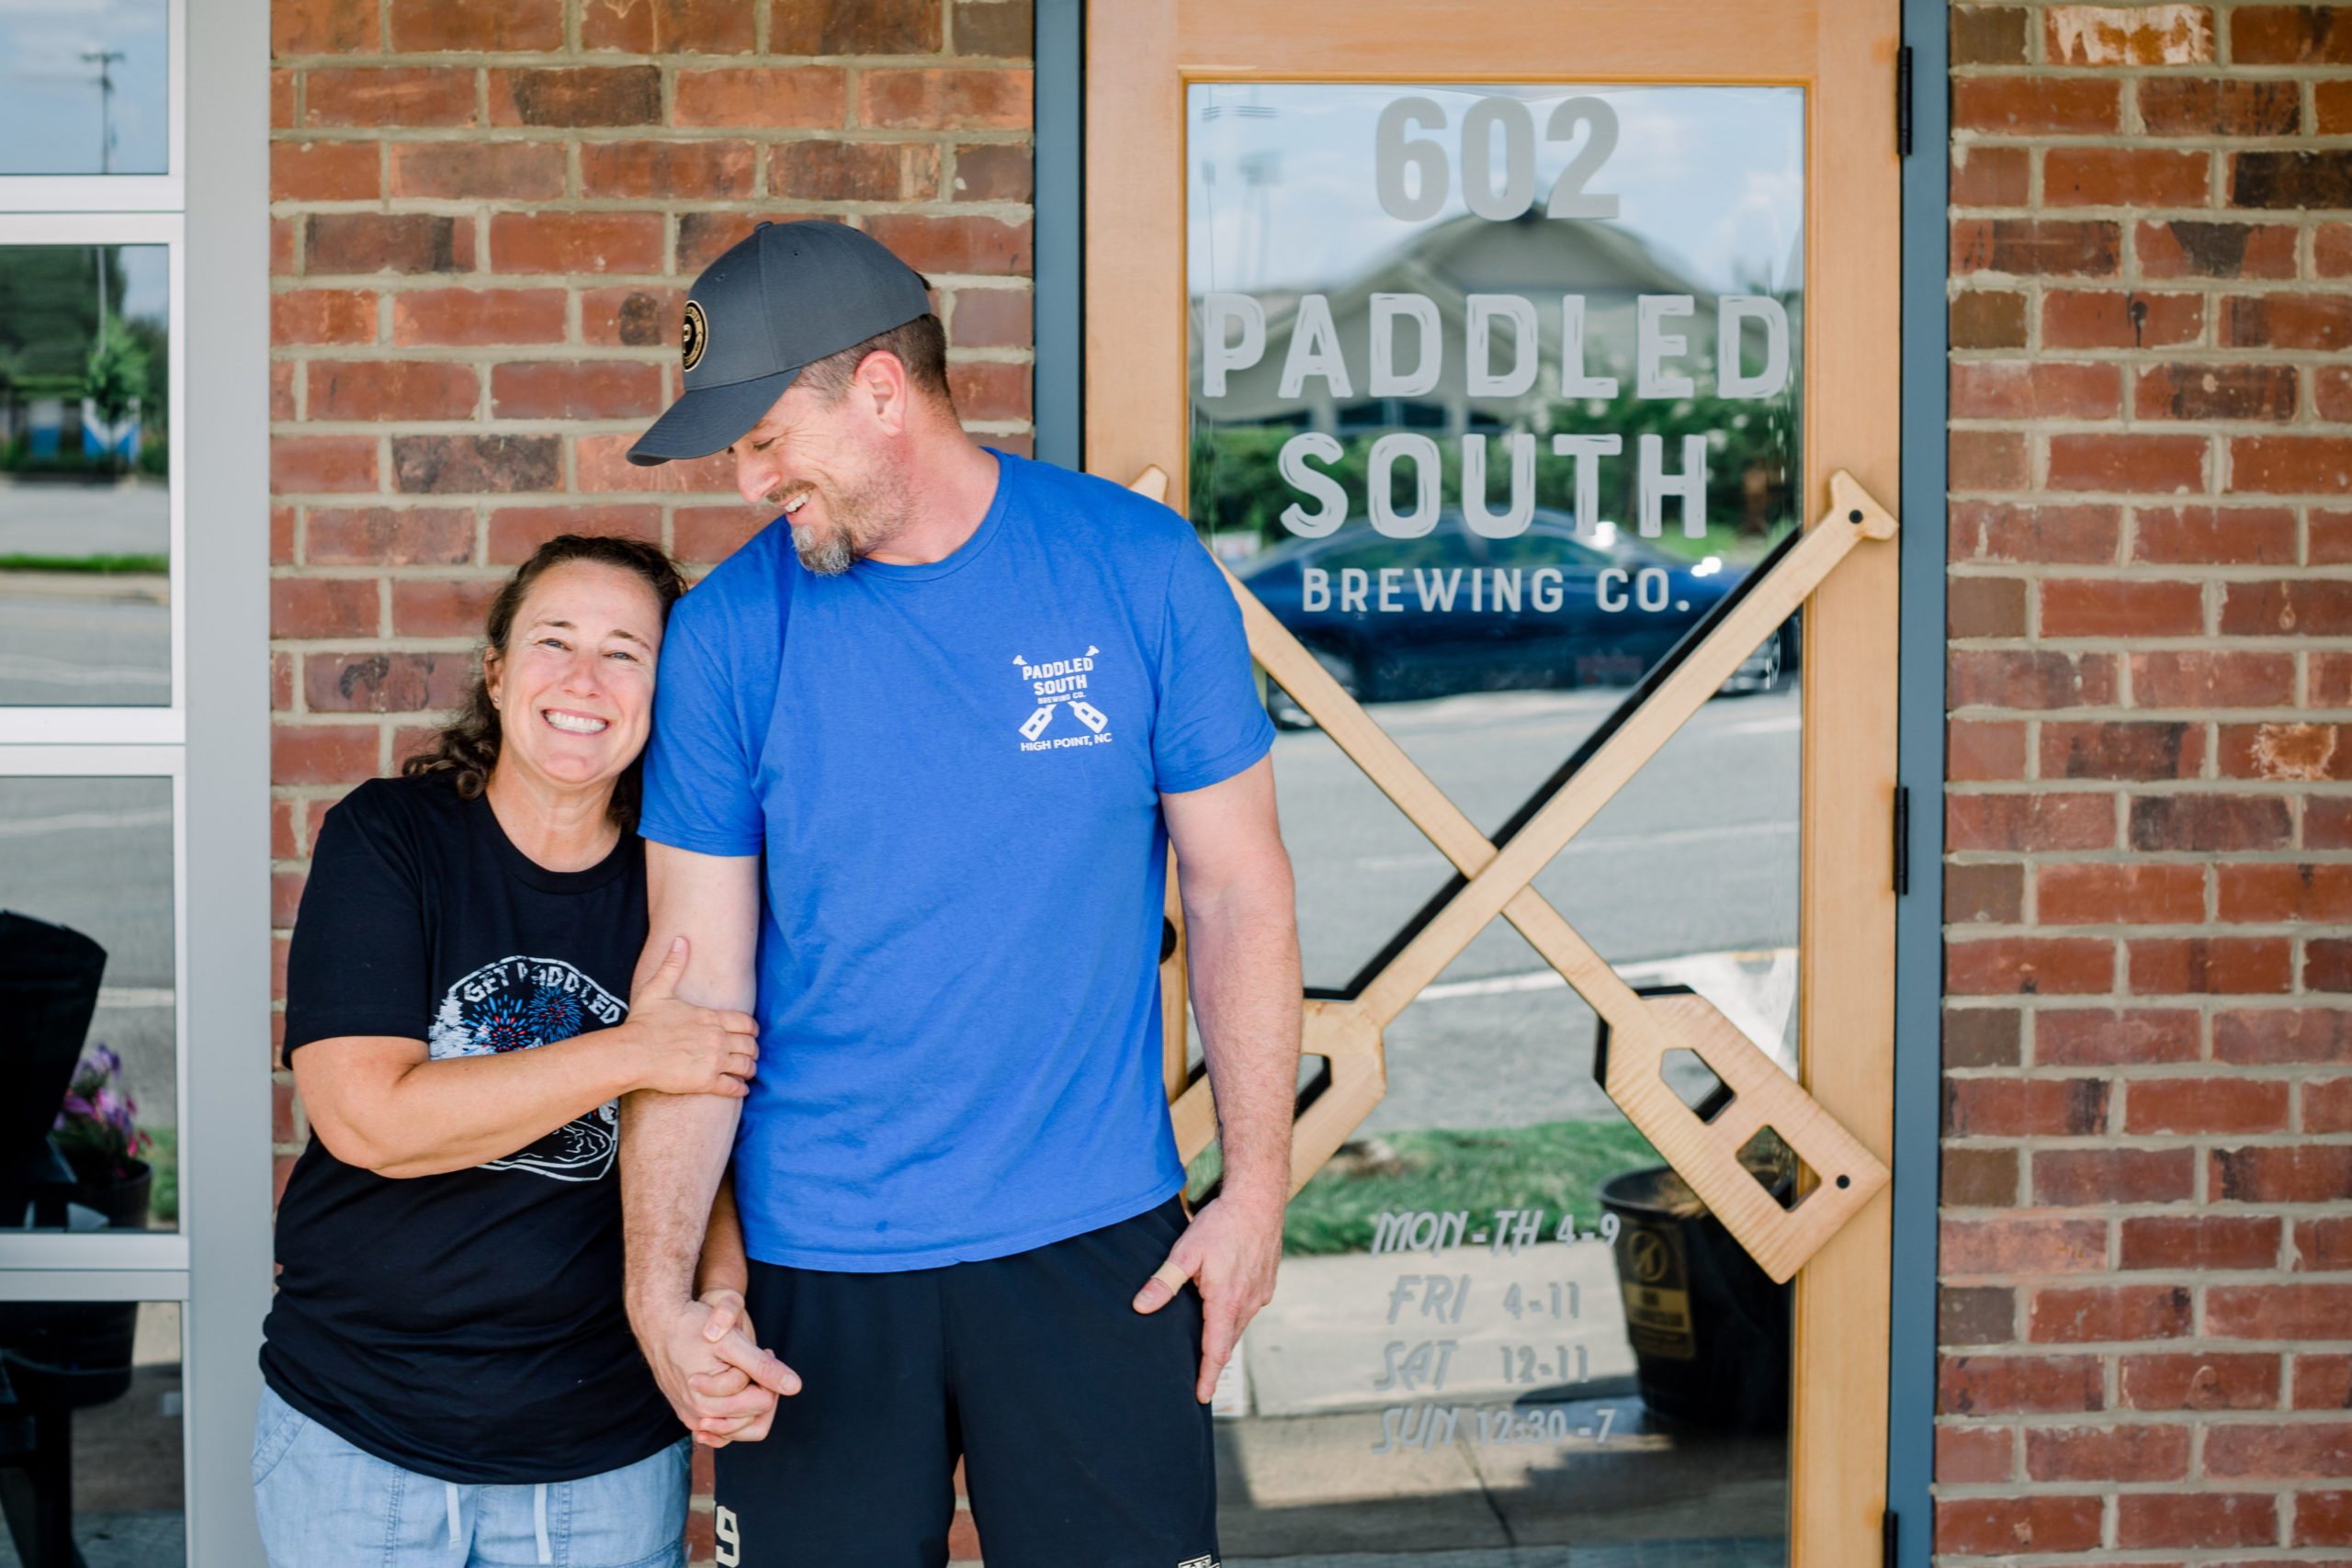 David and Amy Nissen, owners of Paddled South Brewing Co., stand hand-in-hand in front of the brewery.